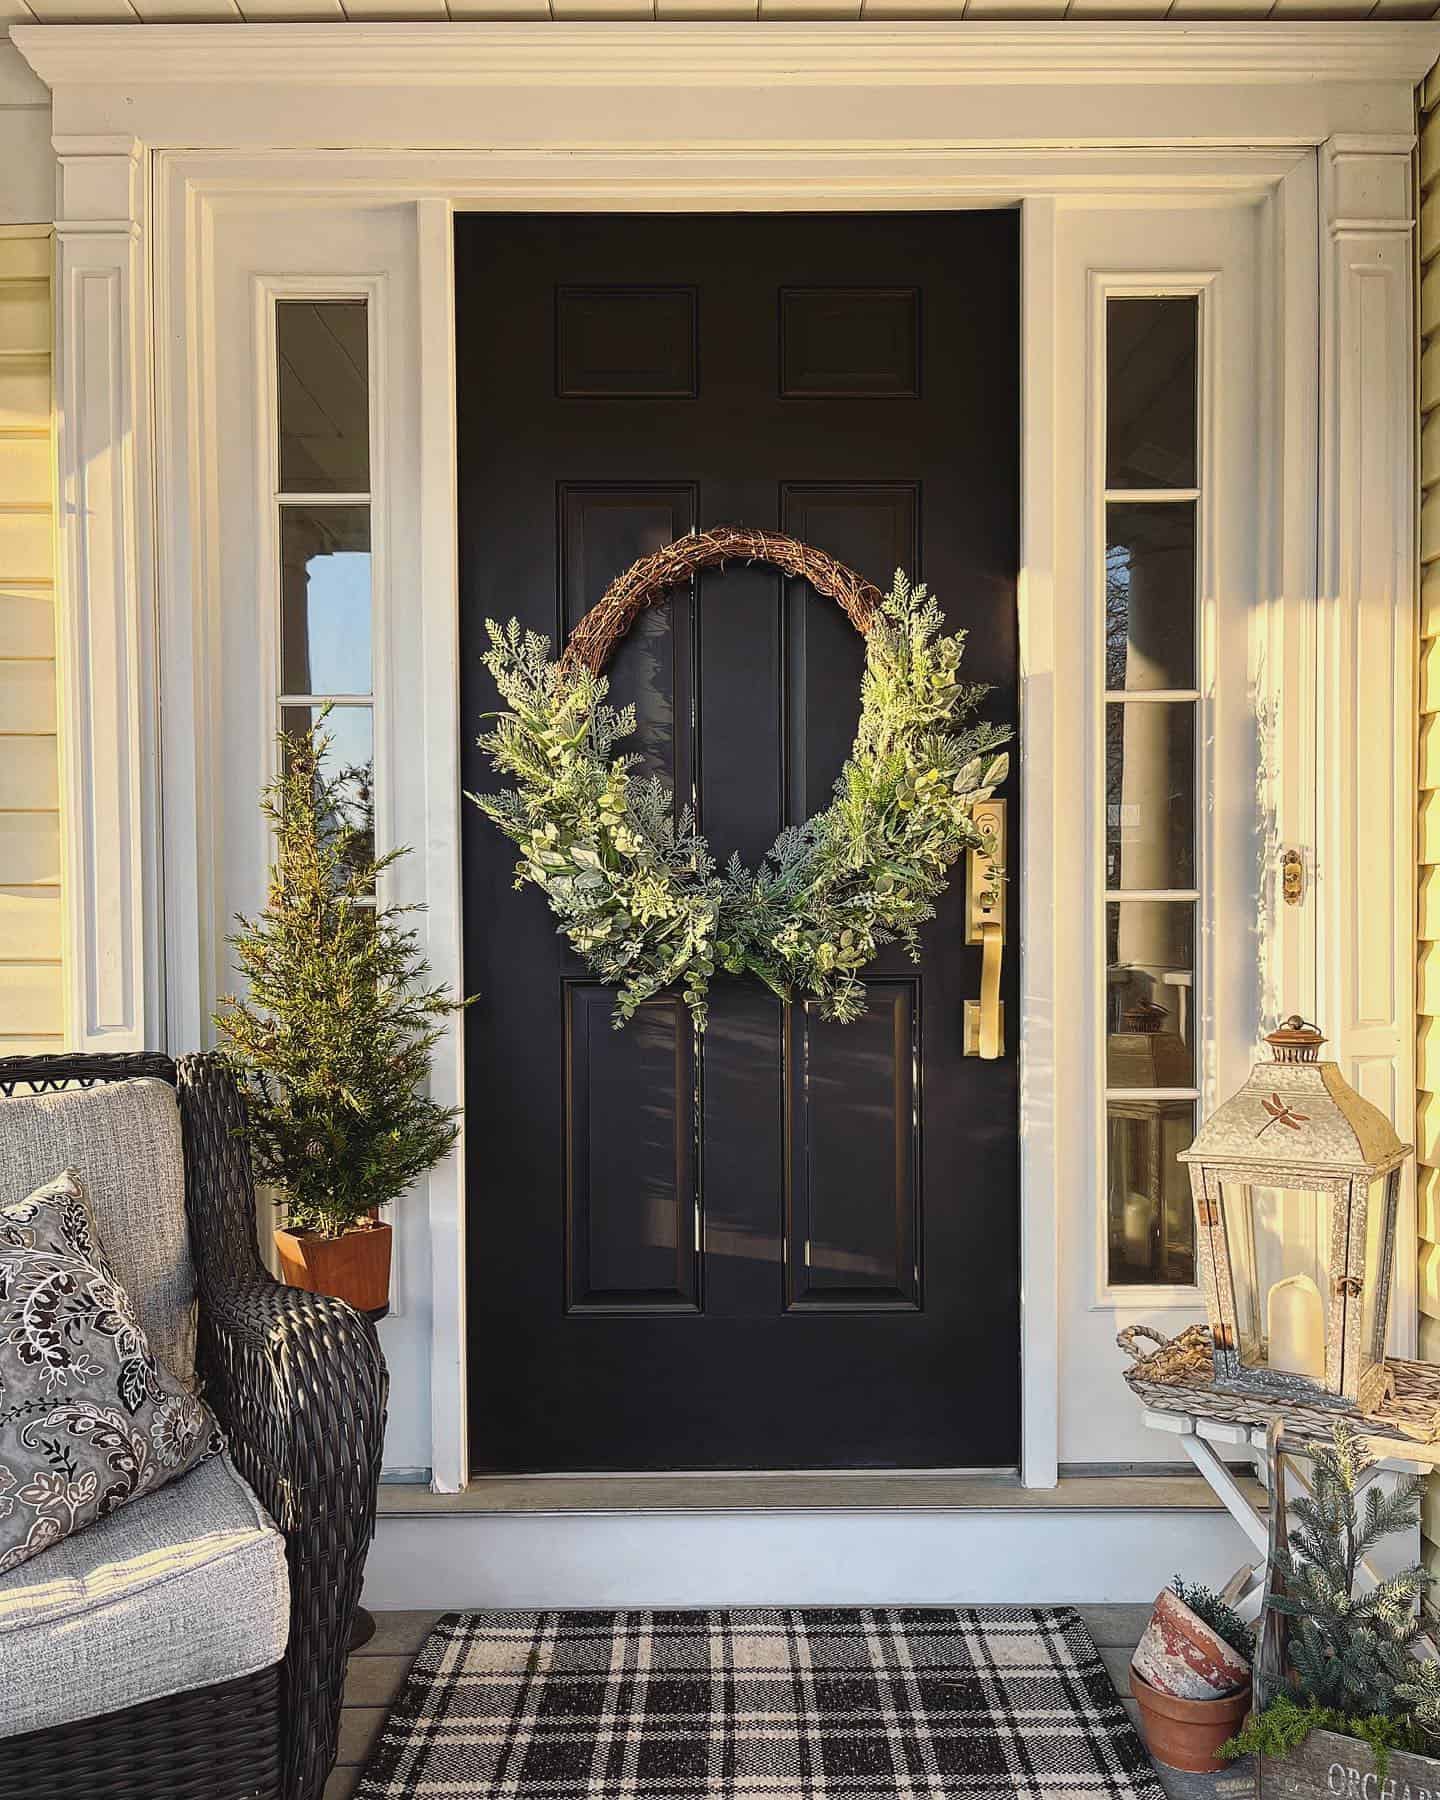 https://www.snazzylittlethings.com/wp-content/uploads/Black-Front-Door-Winter-Front-Porch-with-Plaid-Rug-and-Juniper-by-SnazzyLittleThings.jpg